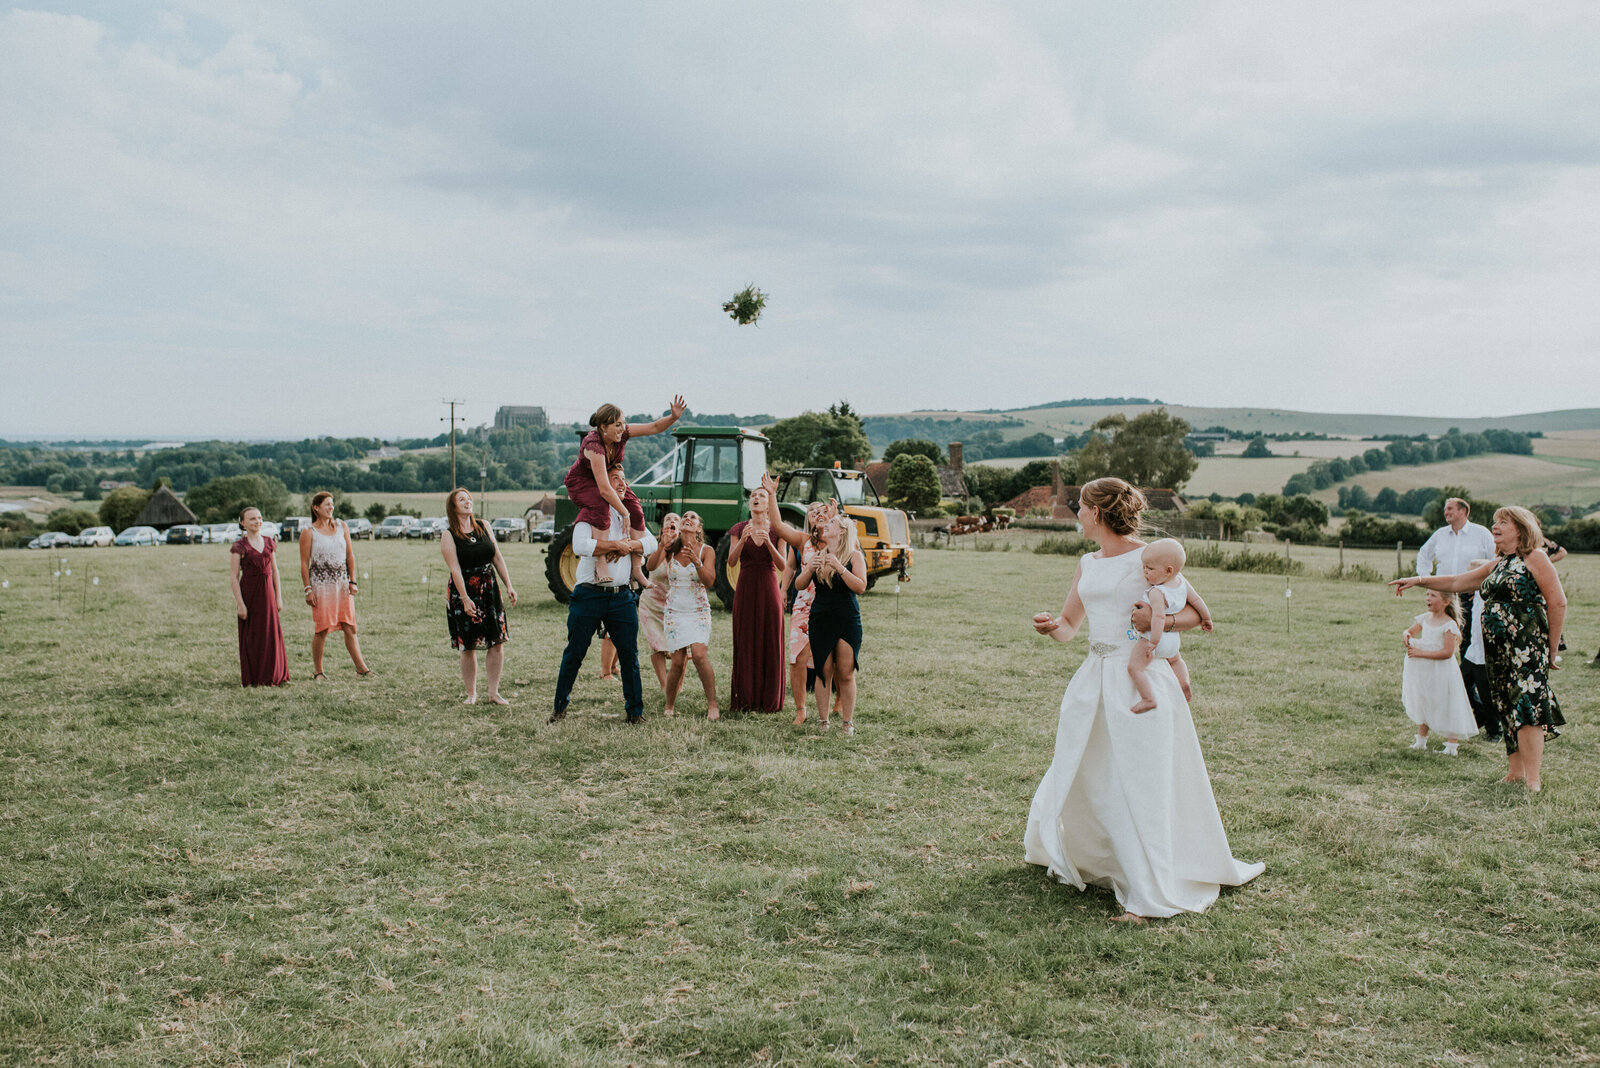 Bride throwing her bouquet to a group of female guests and bridesmaids